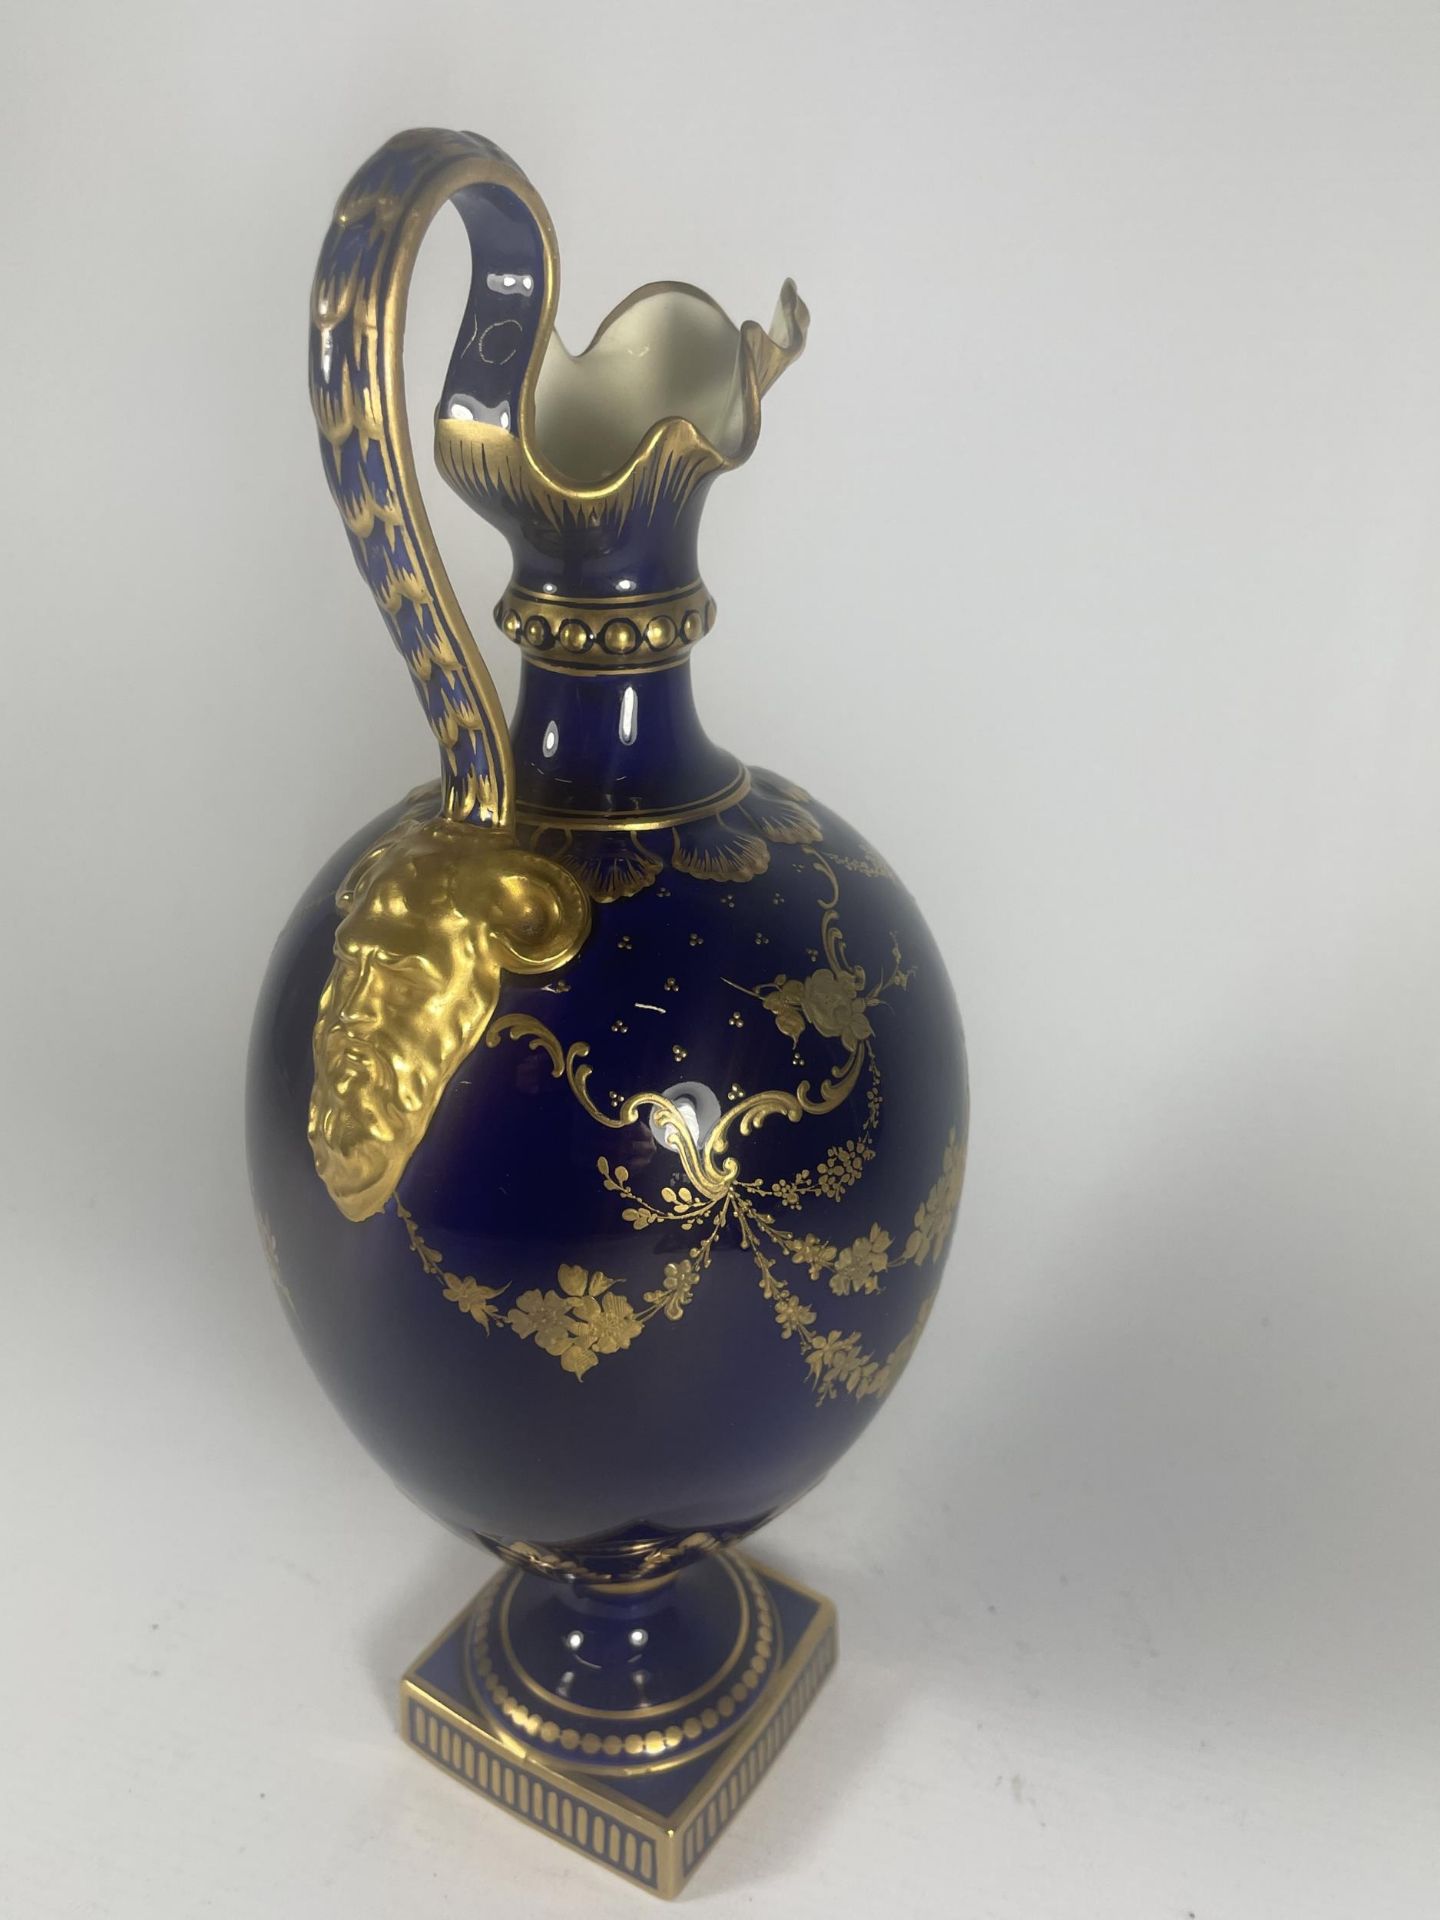 A ROYAL CROWN DERBY EWER DECORATED IN COBALT BLUE AND GILT DESIGN - Image 2 of 4